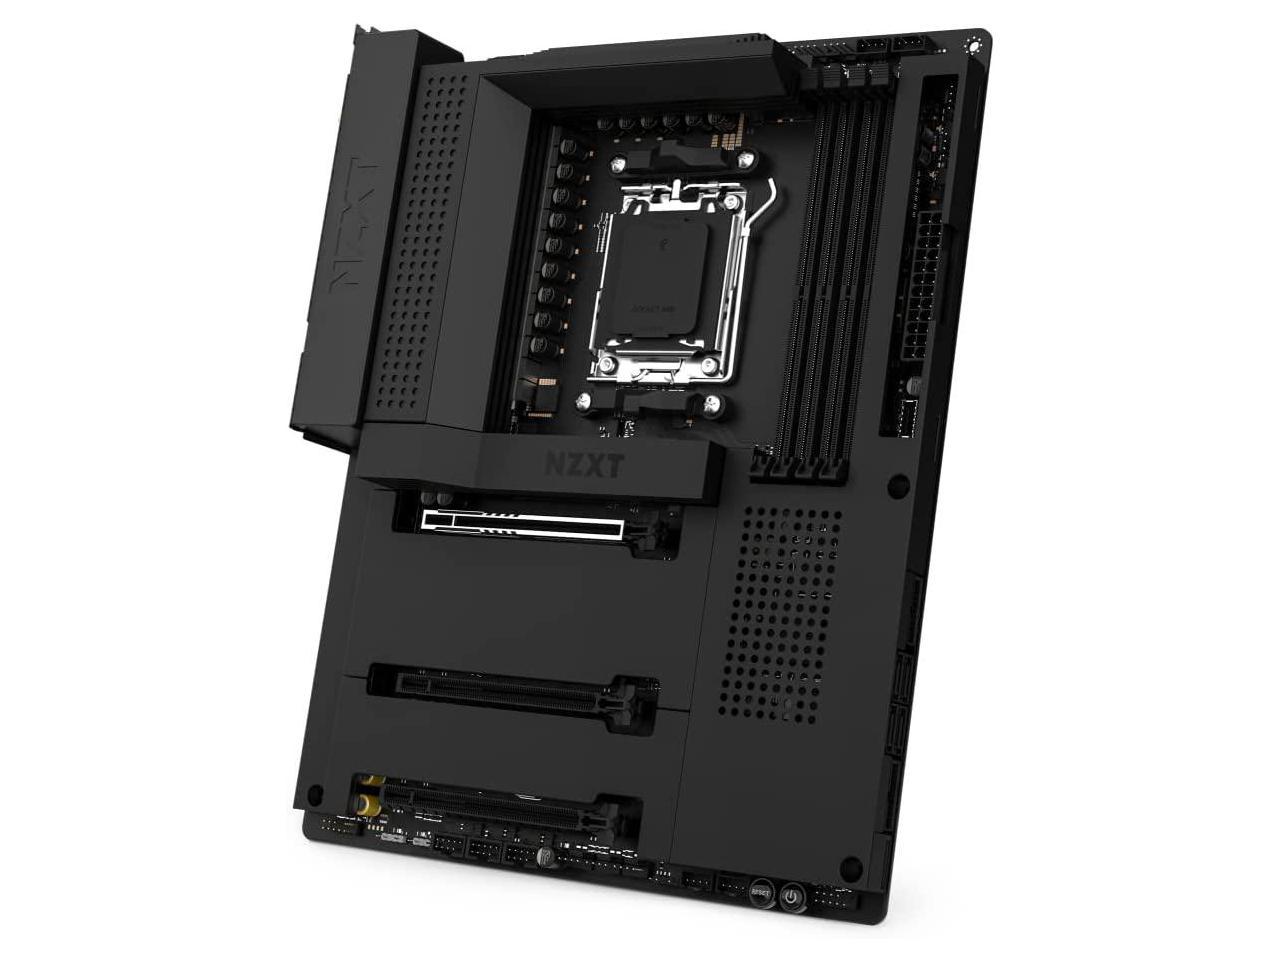 NZXT N7 B650 - N7-B65XT-B1 - AMD B650 chipset (Supports AMD 7000 Series CPUs) - ATX Gaming Motherboard - Integrated Rear I/O Shield - WiFi 6 connectivity - Black - image 2 of 16